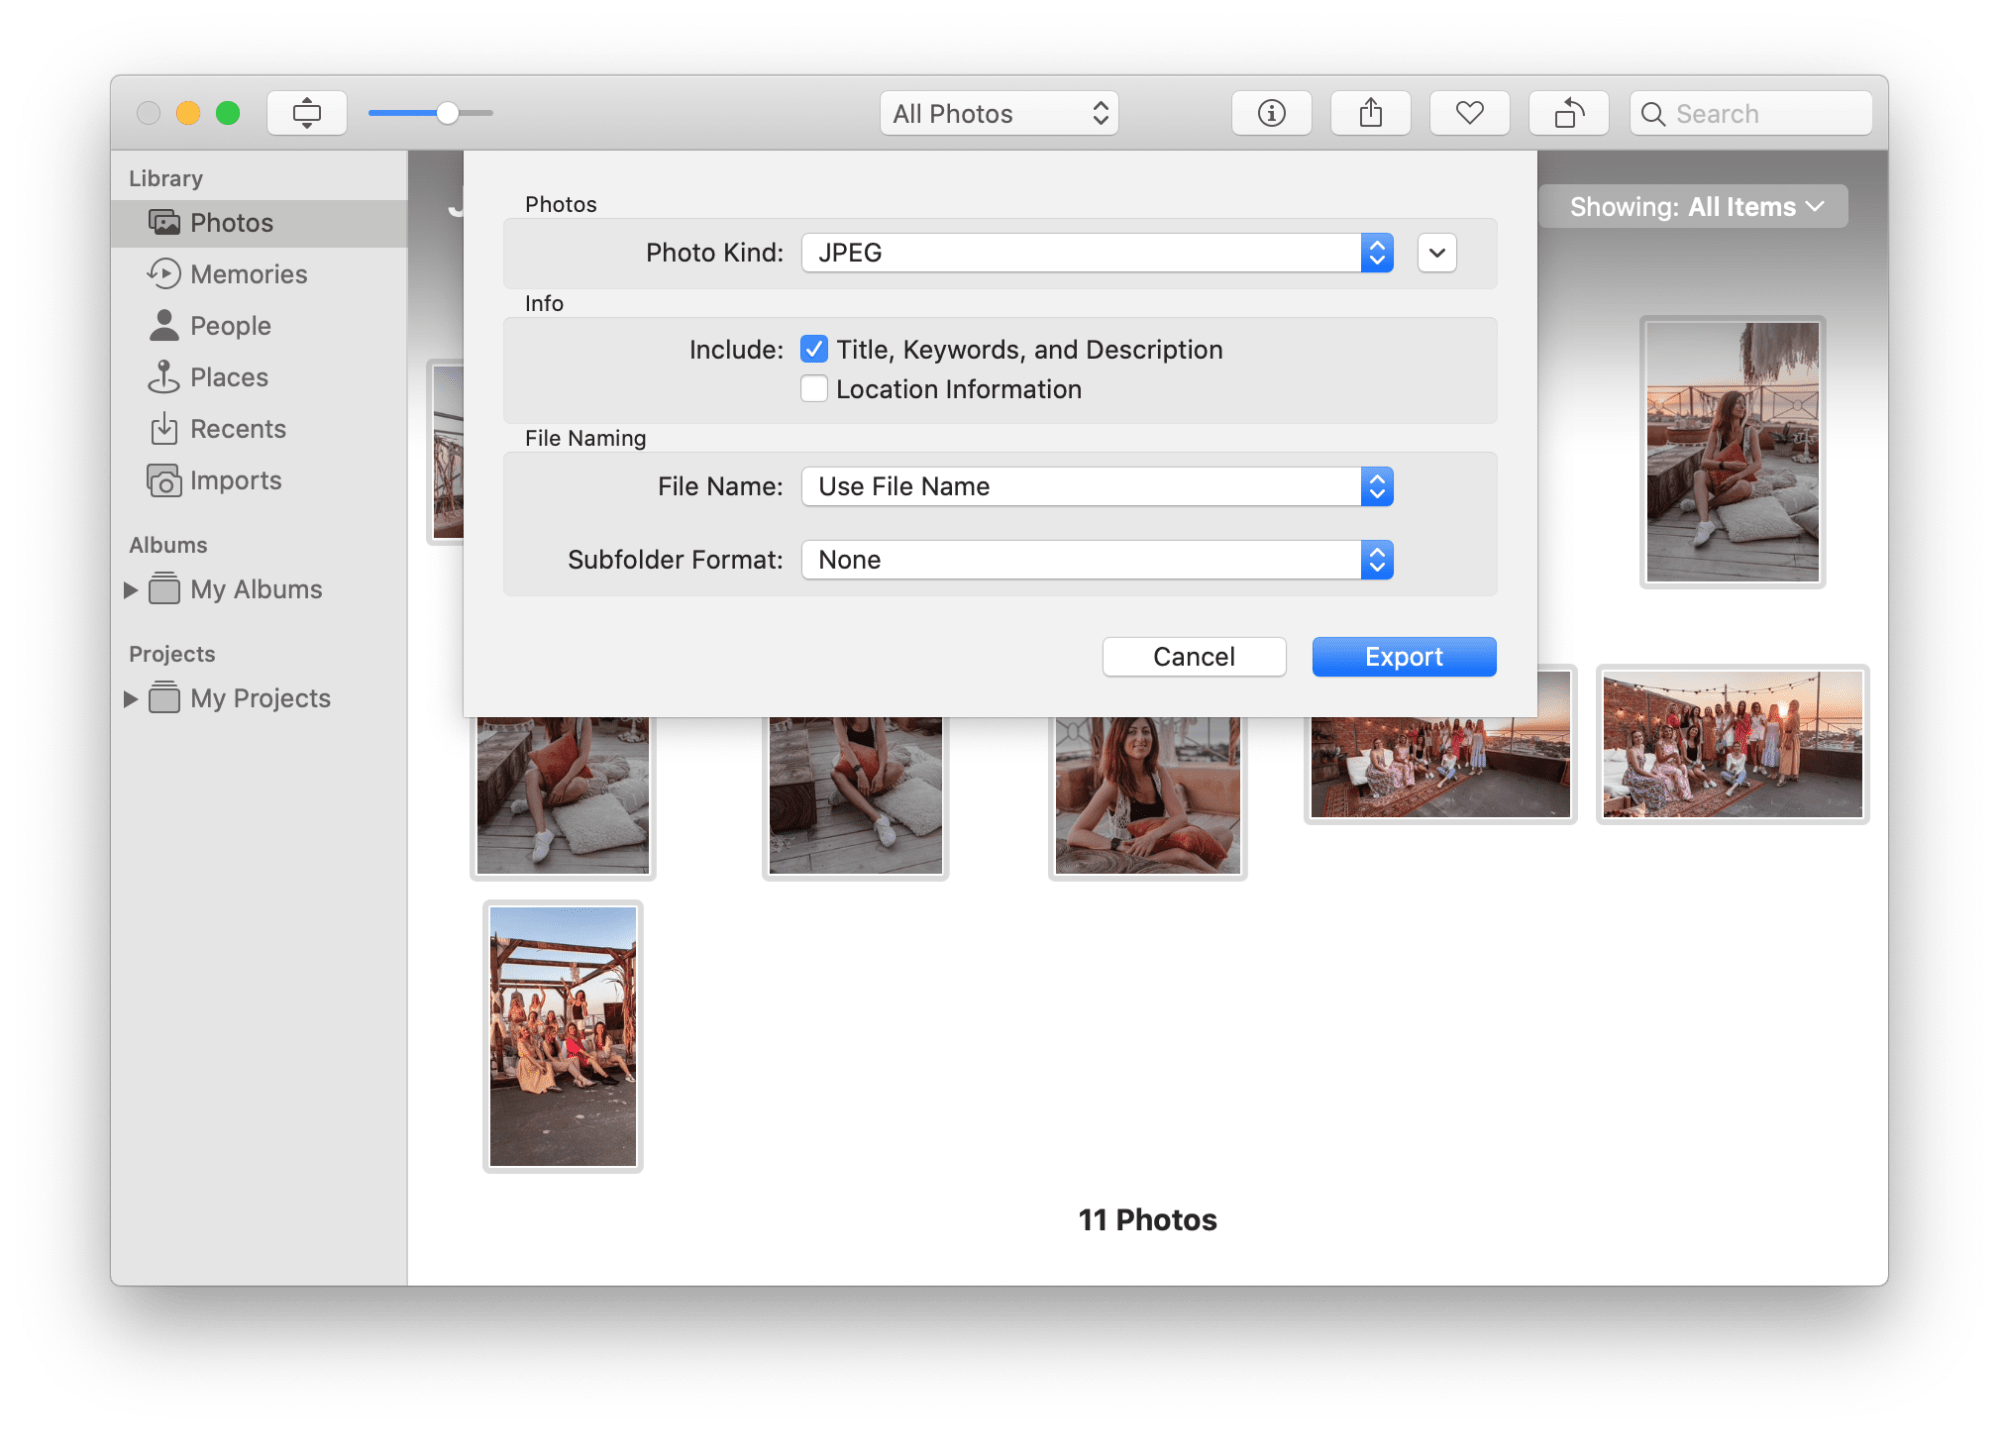 photos setting for export option